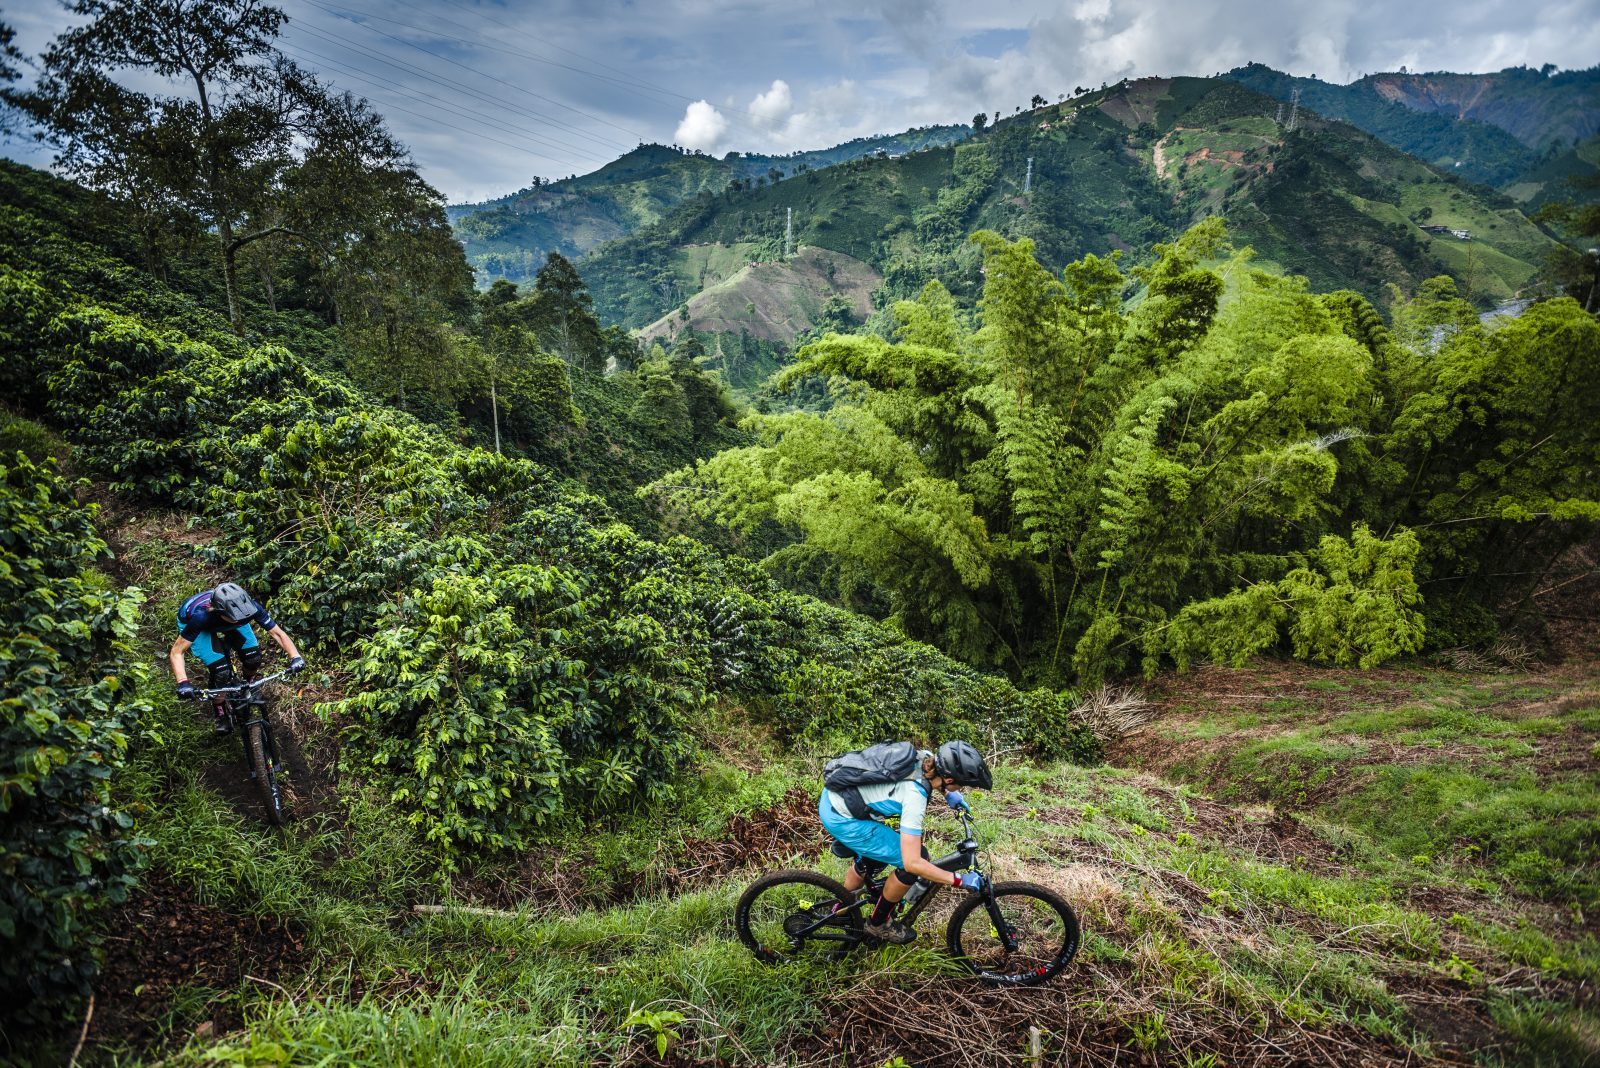 Green-greener-Colombia-The-twins-riding-through-the-coffee-plantations-in-Manizales-1600x1068.jpg